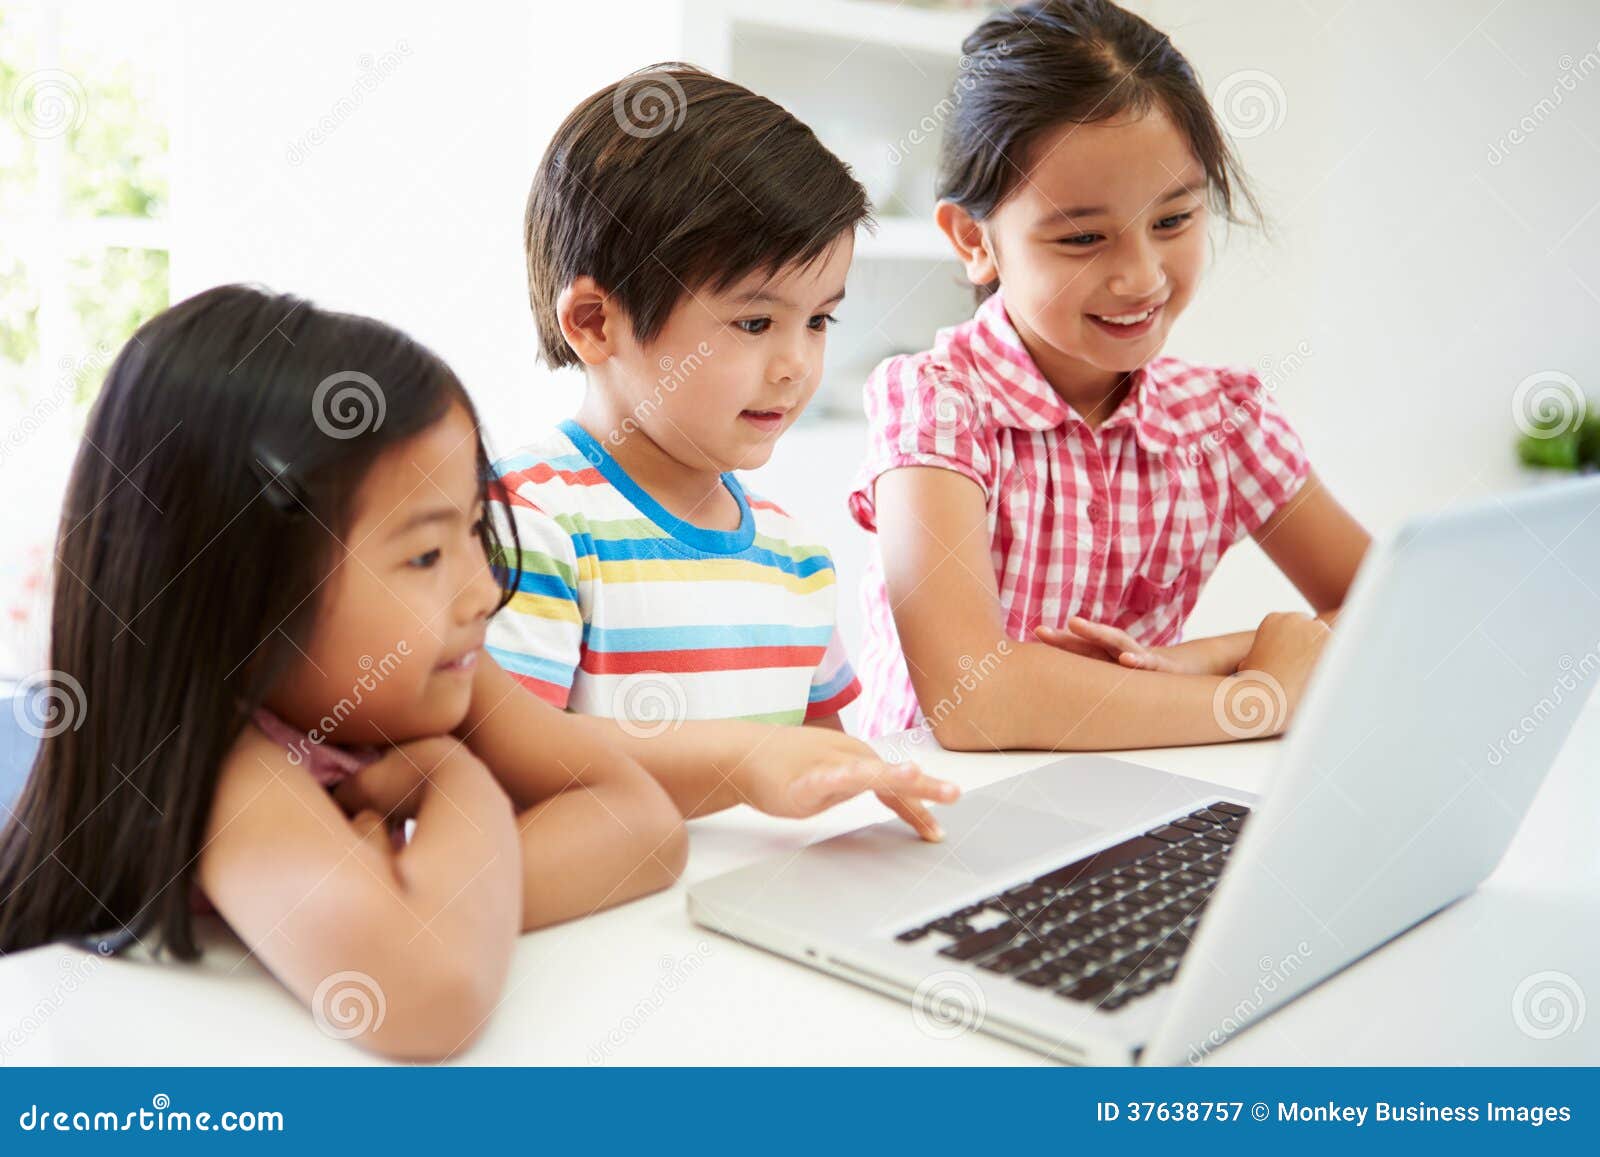 Three Asian Children Using Laptop At Home Royalty Free ...